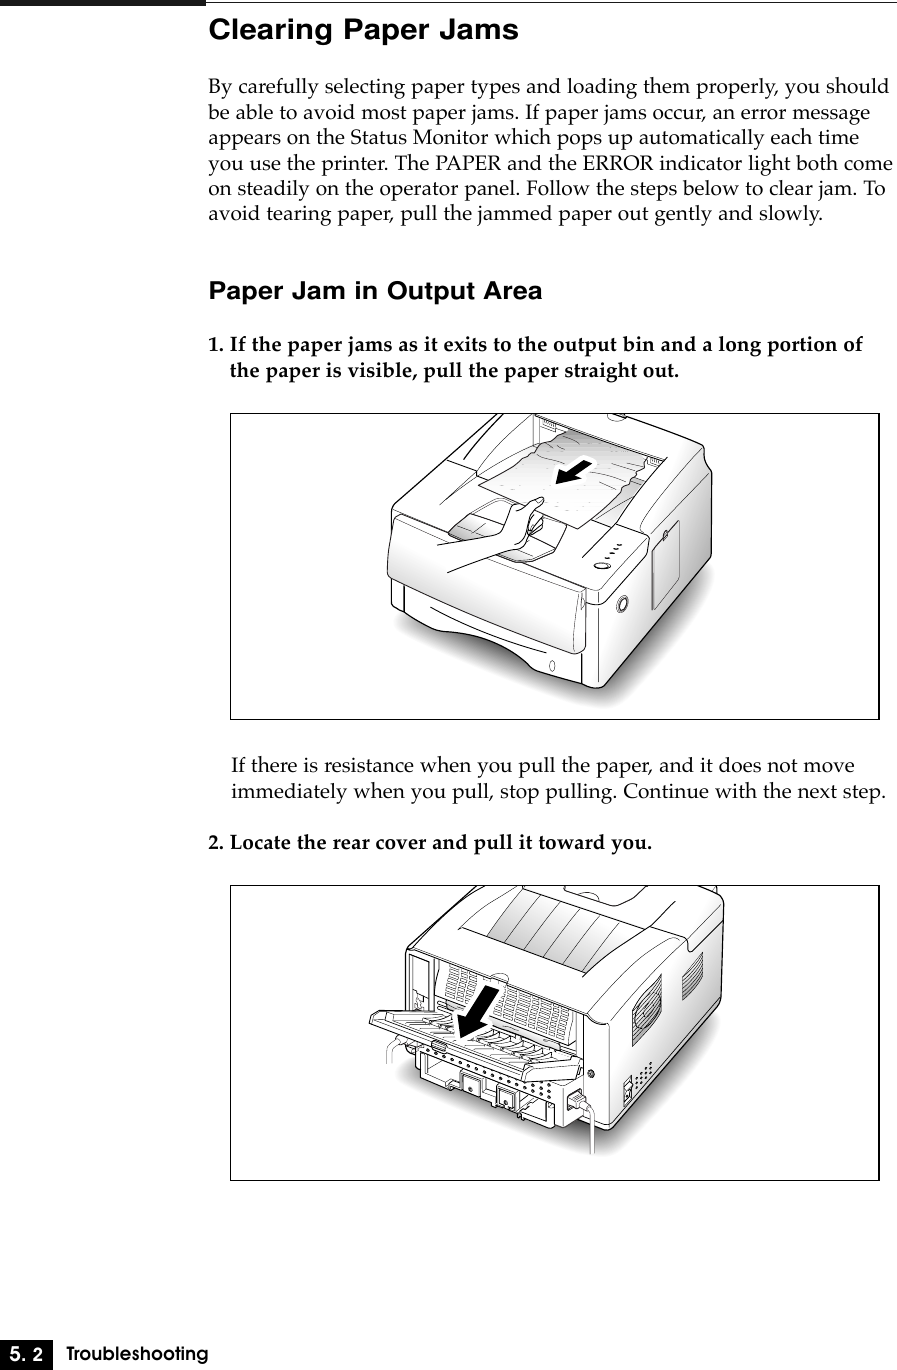 5. 2TroubleshootingClearing Paper JamsBy carefully selecting paper types and loading them properly, you shouldbe able to avoid most paper jams. If paper jams occur, an error messageappears on the Status Monitor which pops up automatically each timeyou use the printer. The PAPER and the ERROR indicator light both comeon steadily on the operator panel. Follow the steps below to clear jam. Toavoid tearing paper, pull the jammed paper out gently and slowly.Paper Jam in Output Area1. If the paper jams as it exits to the output bin and a long portion ofthe paper is visible, pull the paper straight out.If there is resistance when you pull the paper, and it does not moveimmediately when you pull, stop pulling. Continue with the next step.2. Locate the rear cover and pull it toward you.